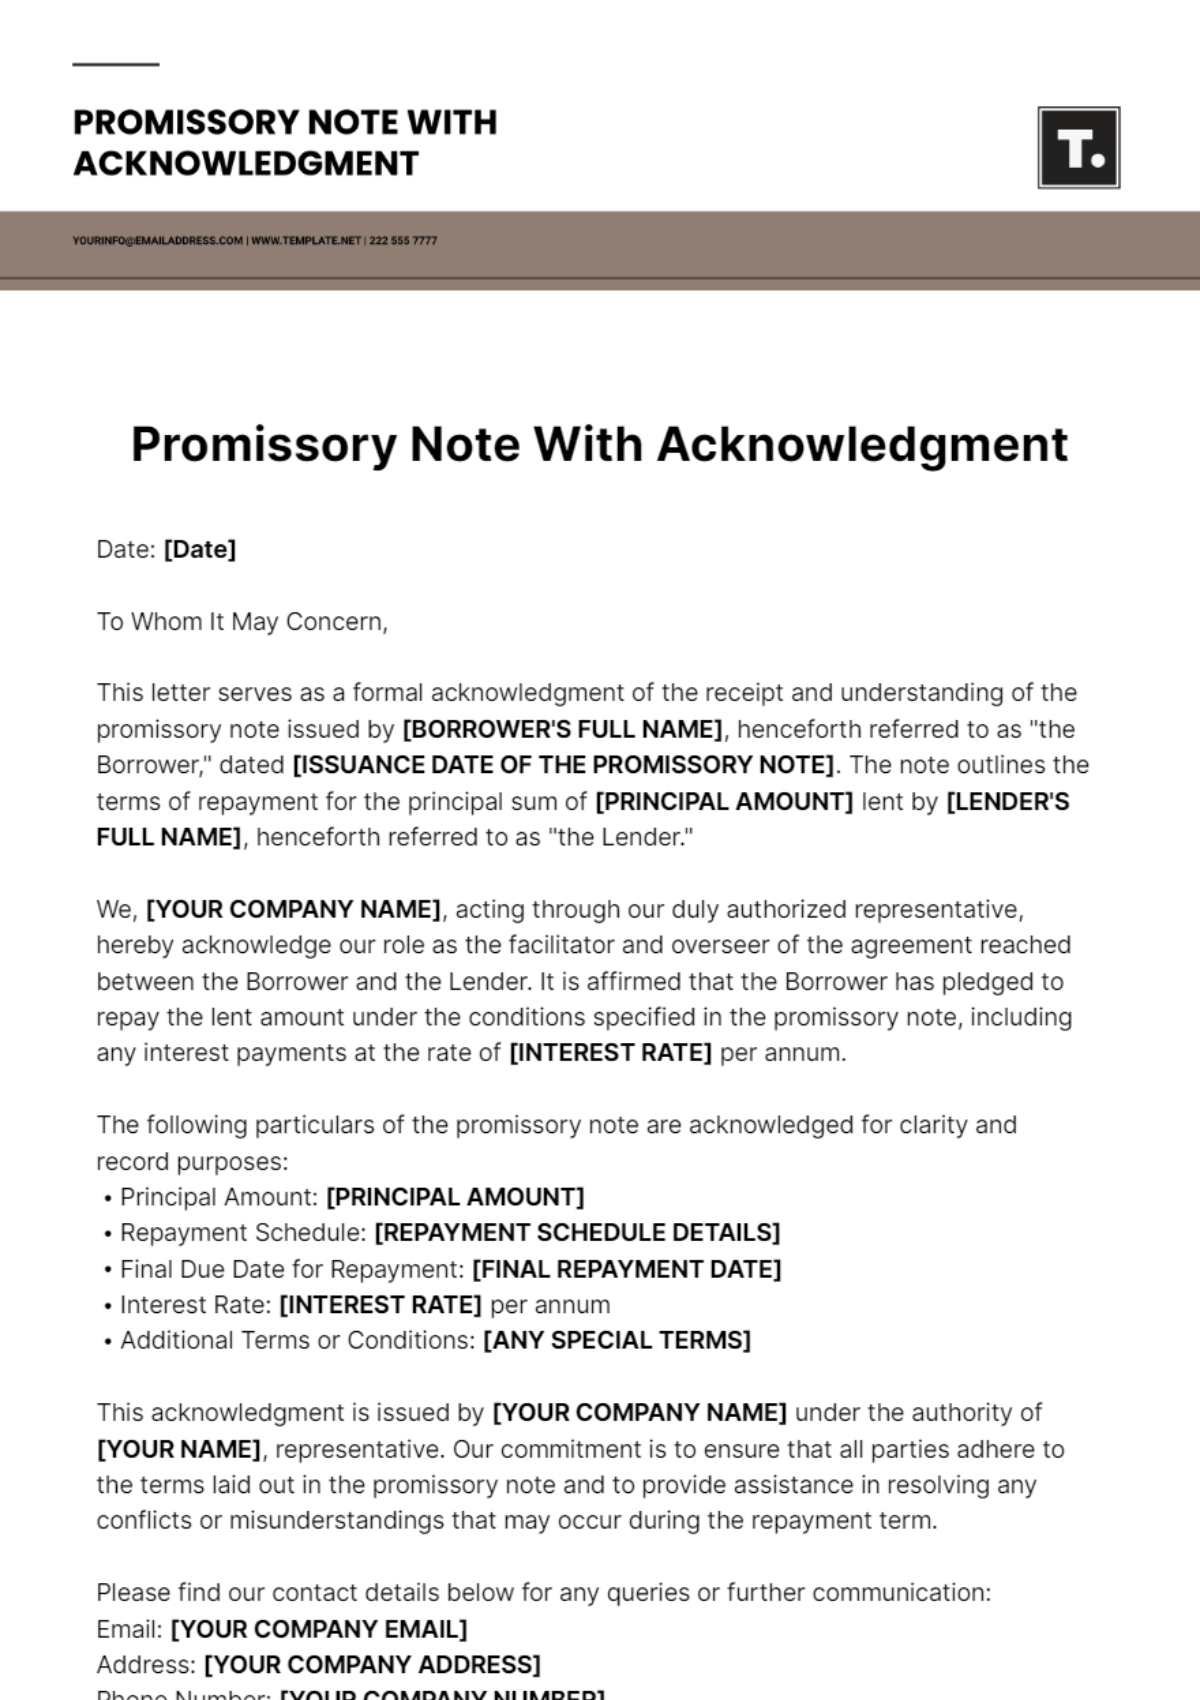 Promissory Note With Acknowledgment Template